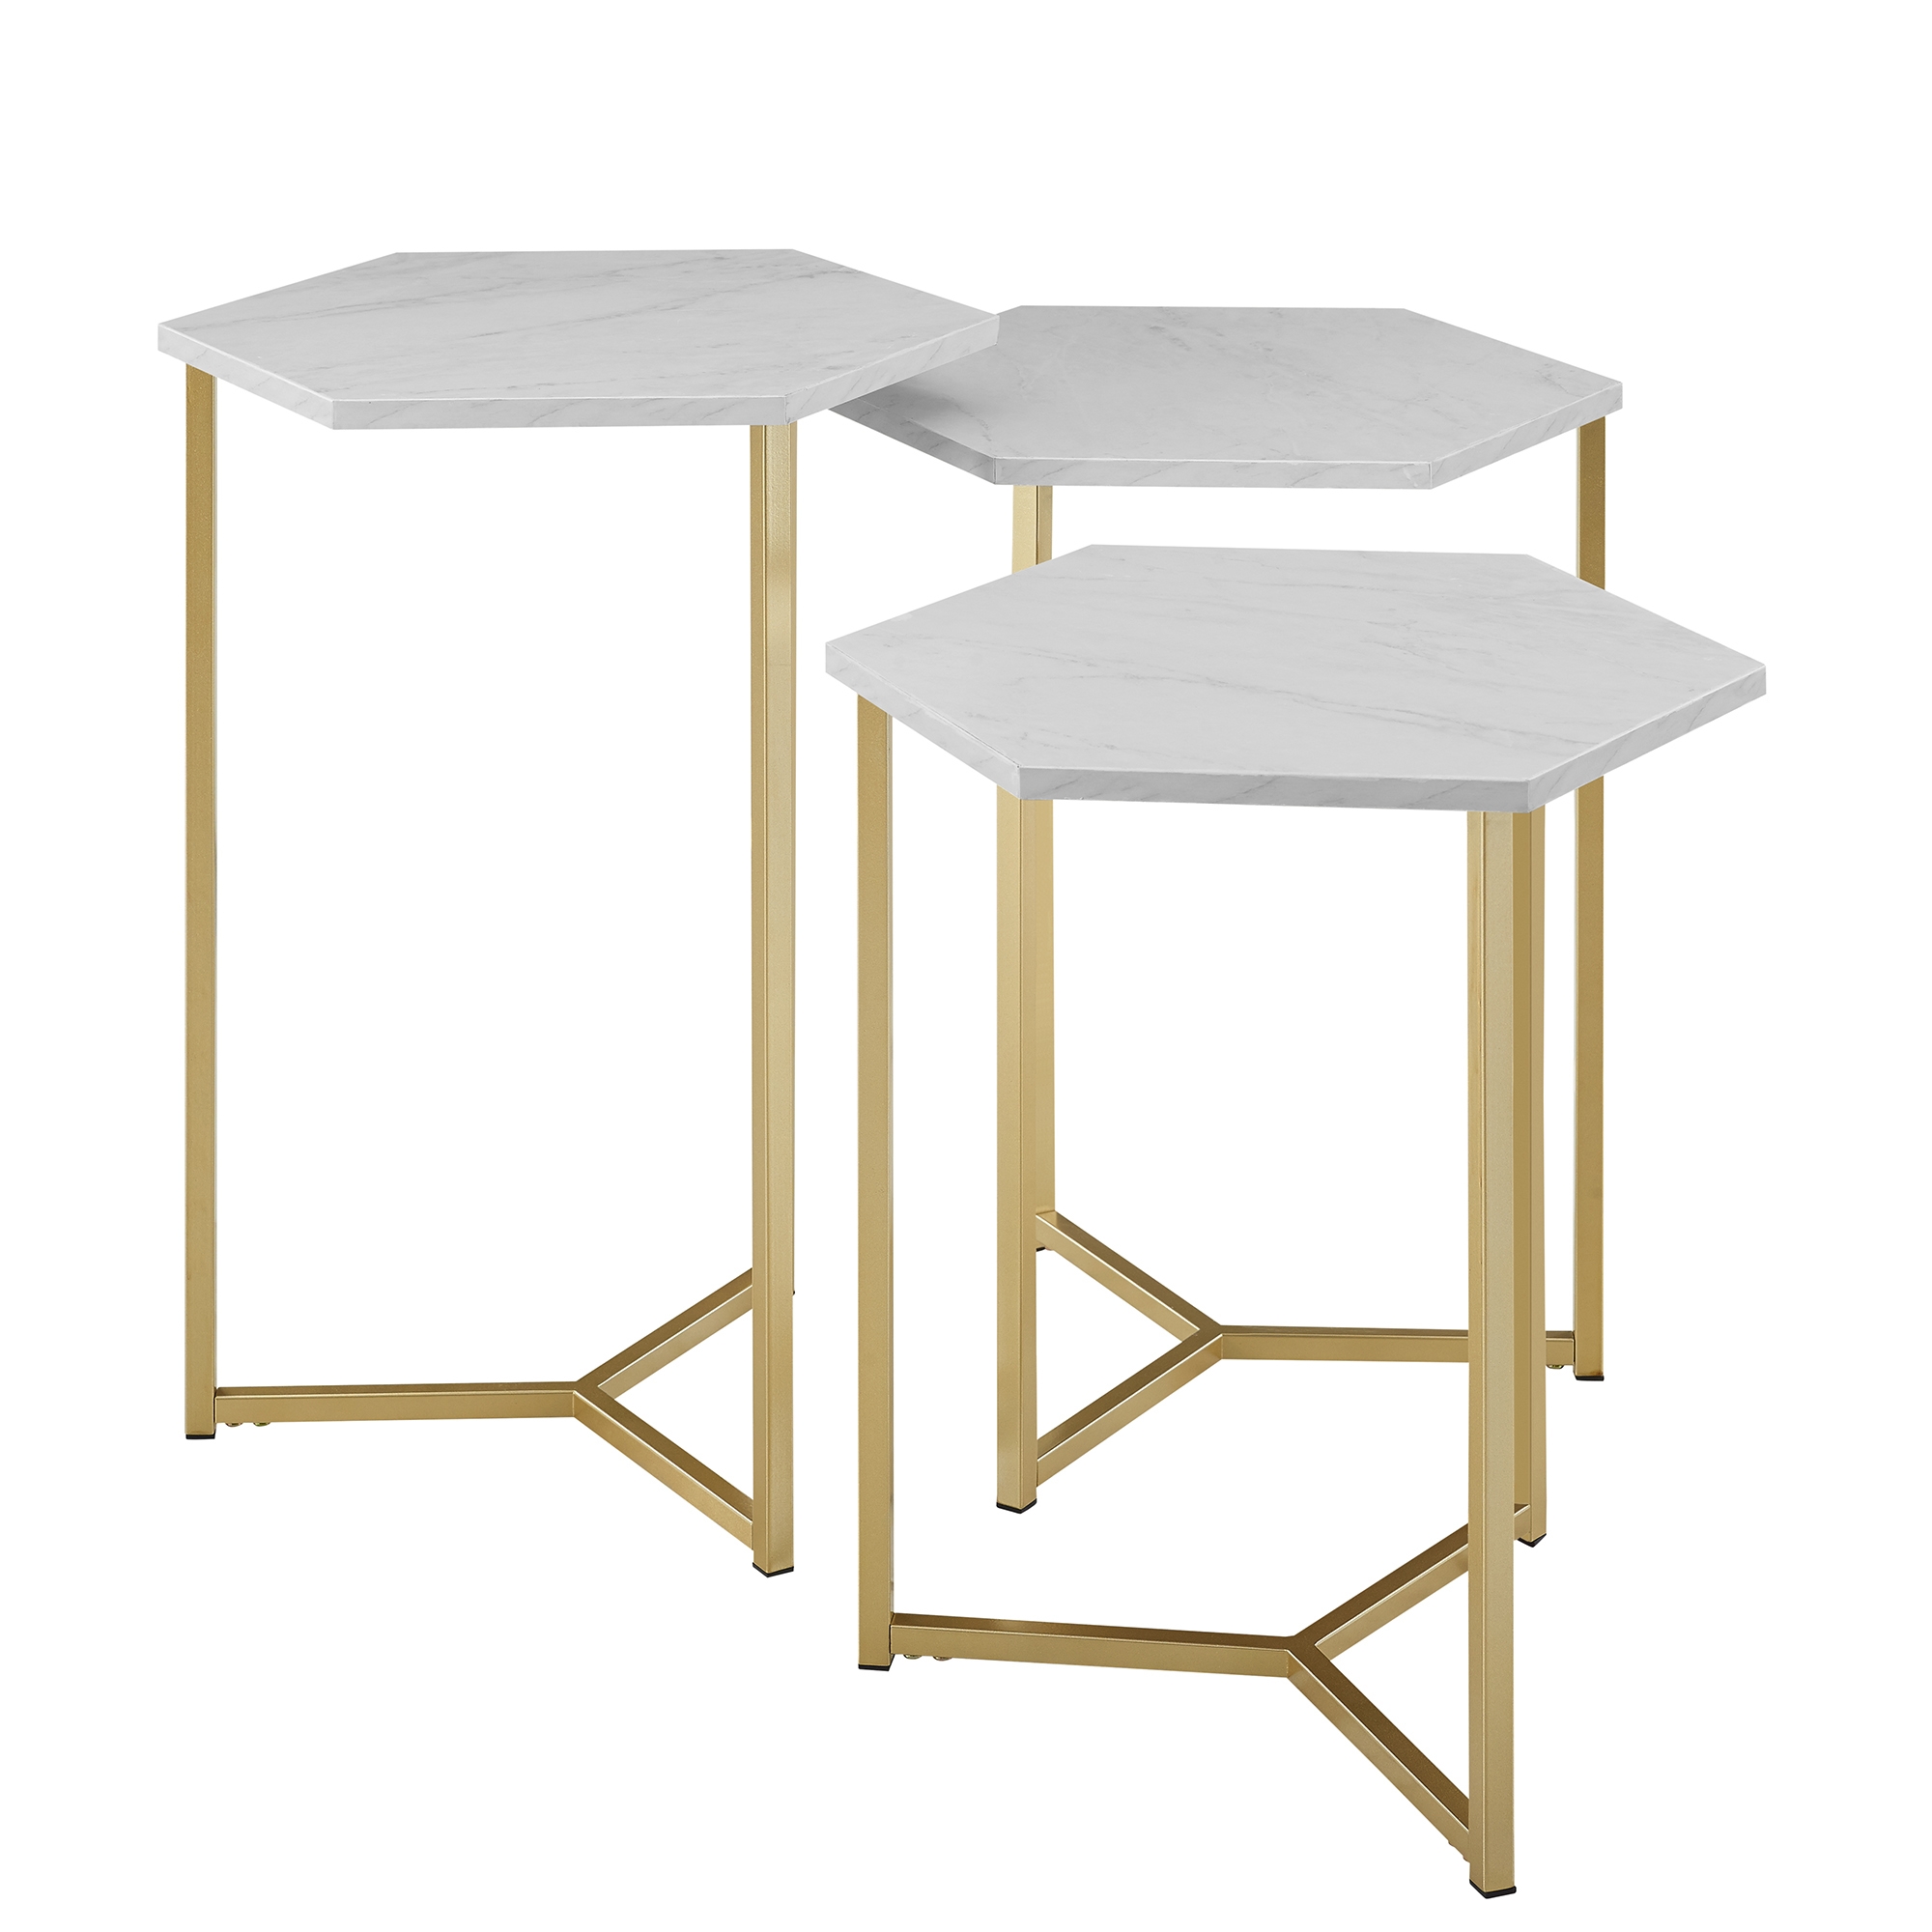 Hexagon Modern Wood Nesting Tables, Set of 3 - Faux White Marble/Gold  - Image 0